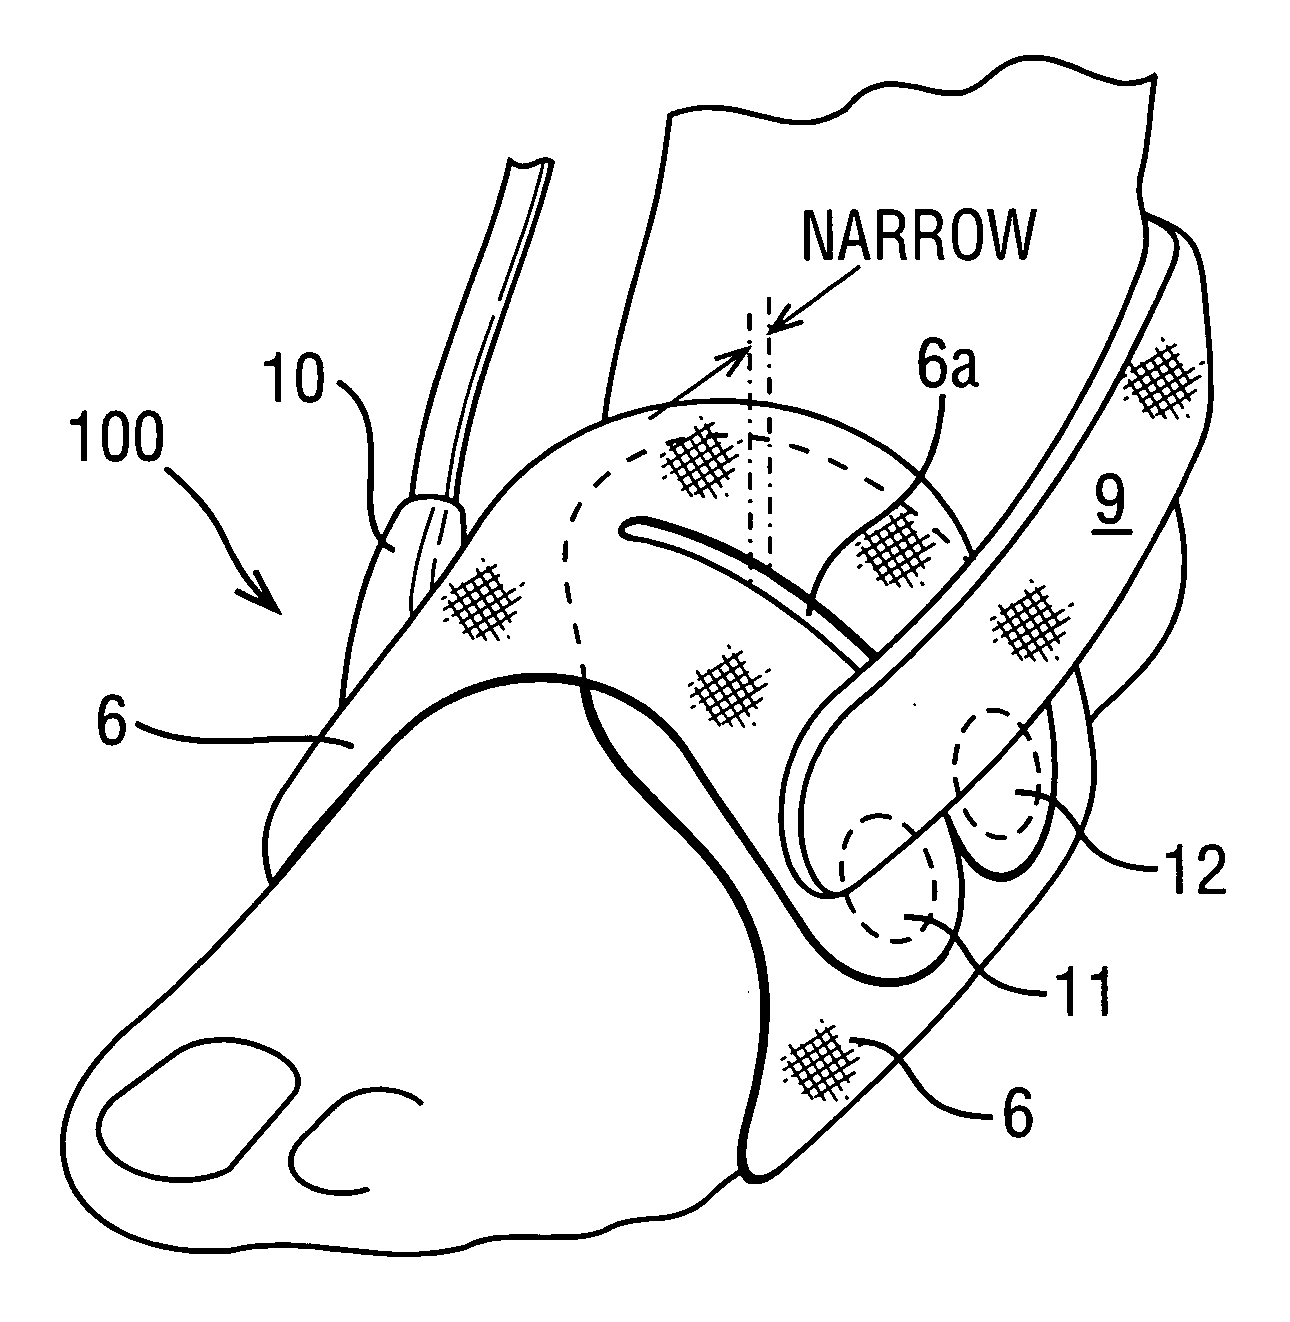 Garment for use in pump therapy for enhancing venous and arterial blood flow